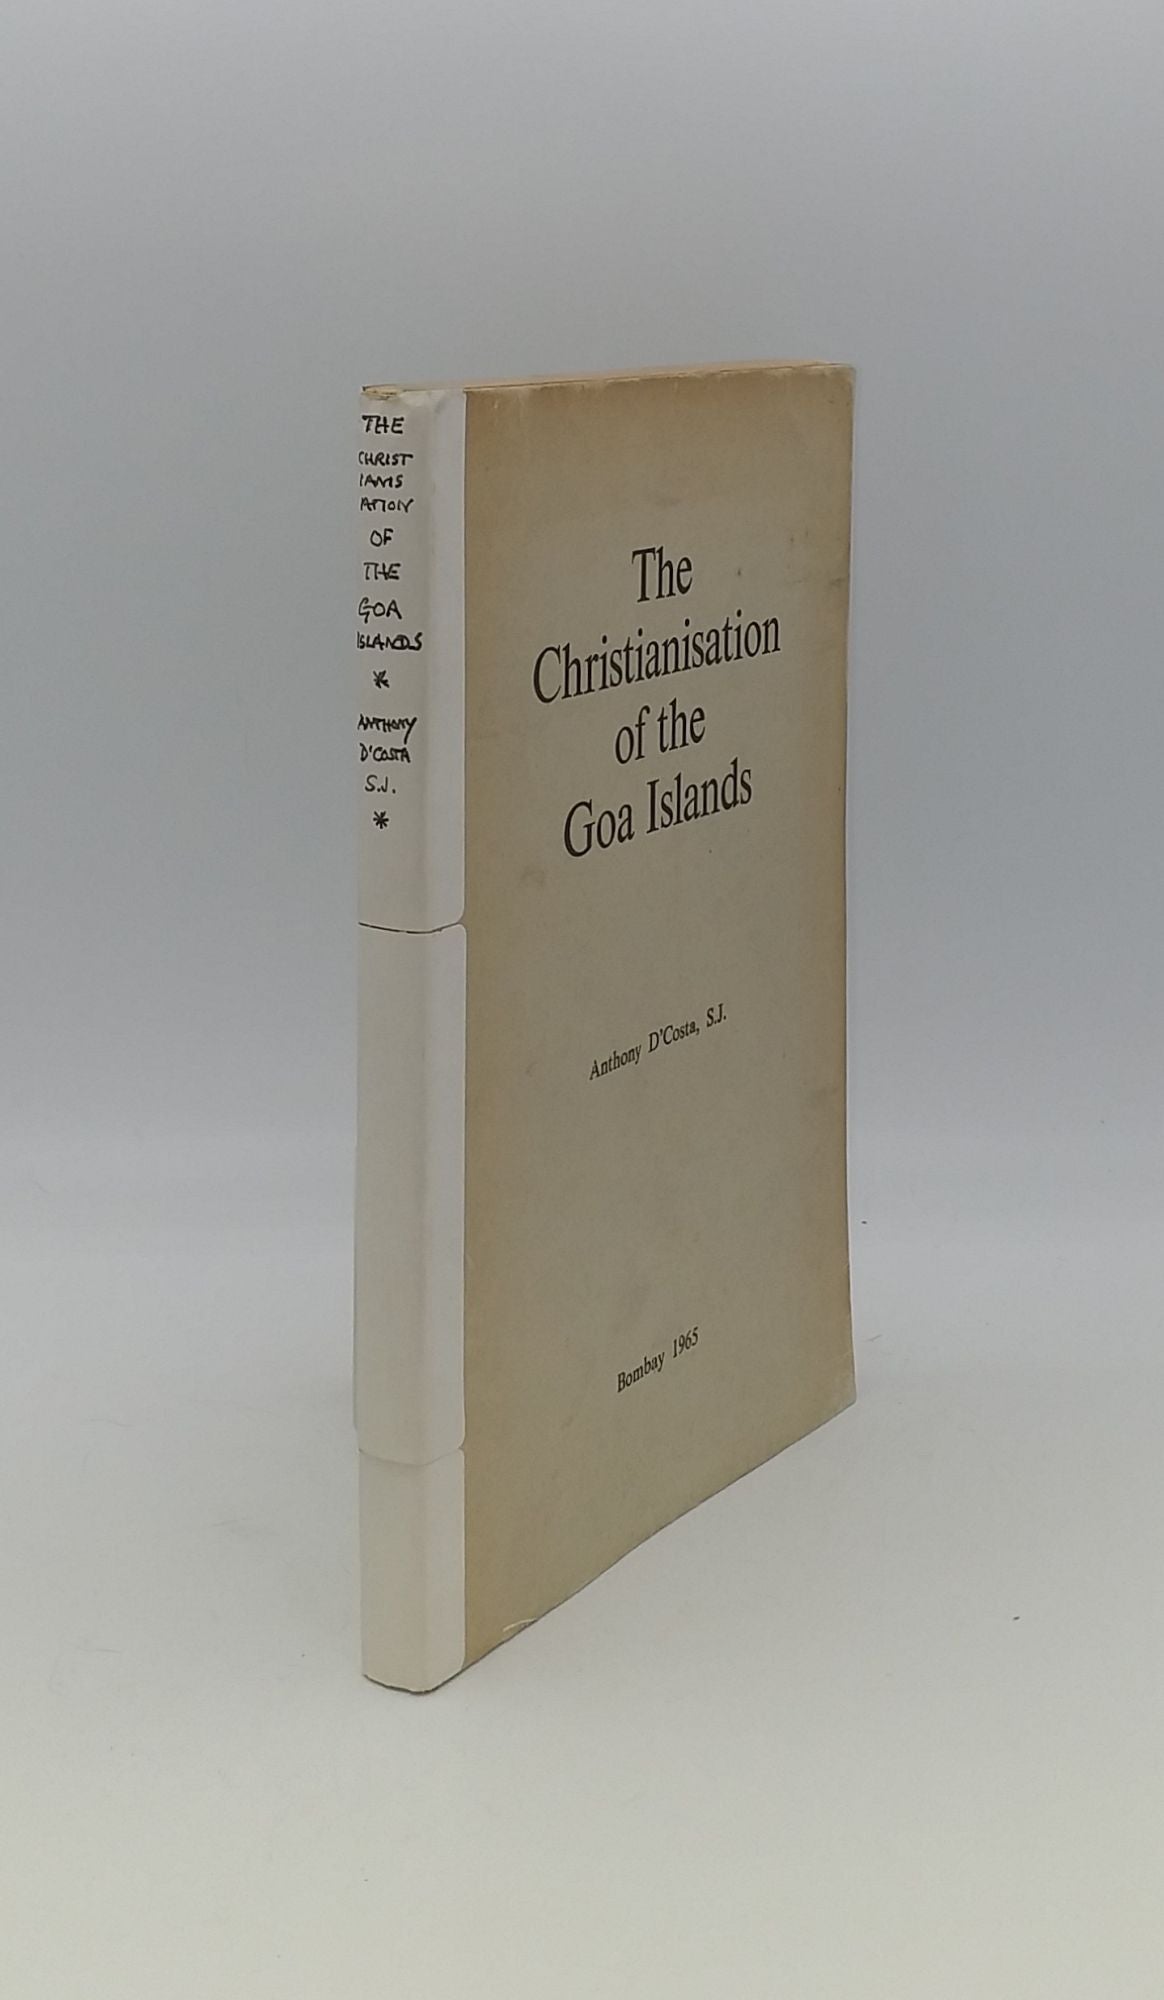 D'COSTA Anthony - The Christianisation of the Goa Islands